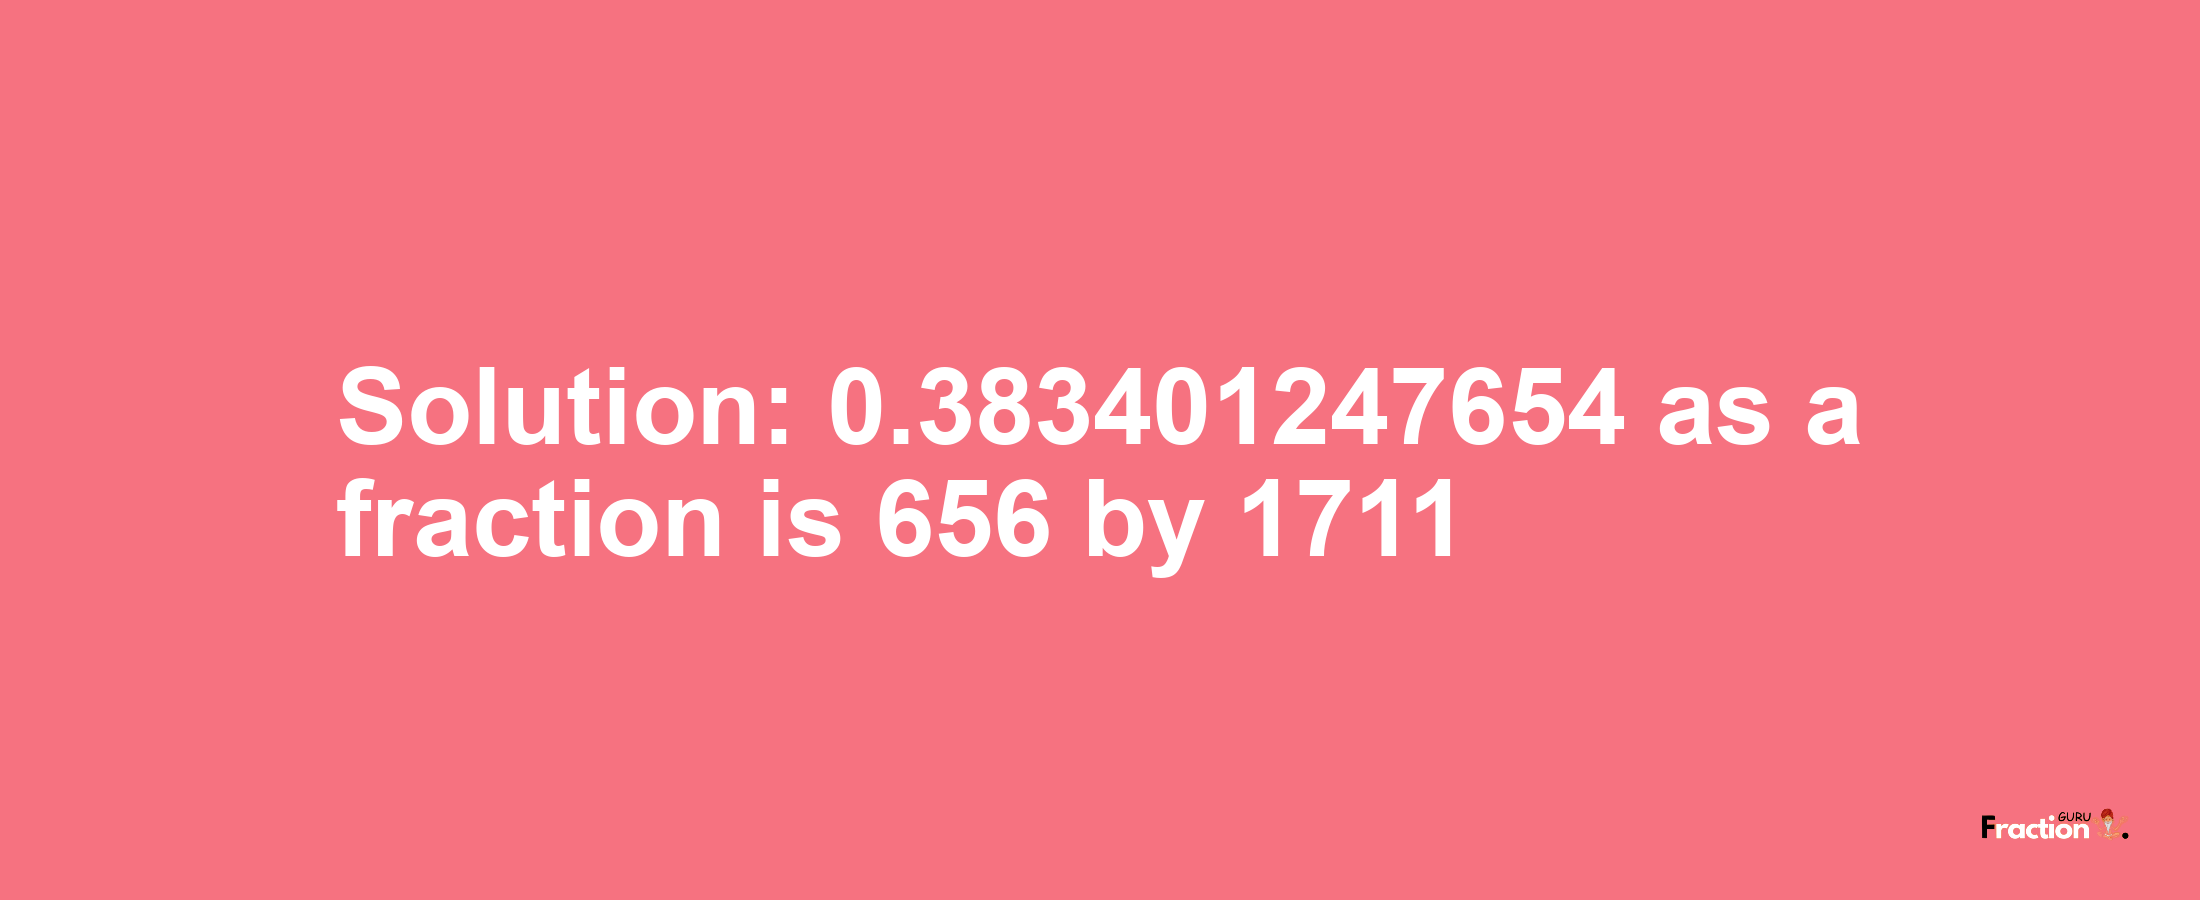 Solution:0.383401247654 as a fraction is 656/1711